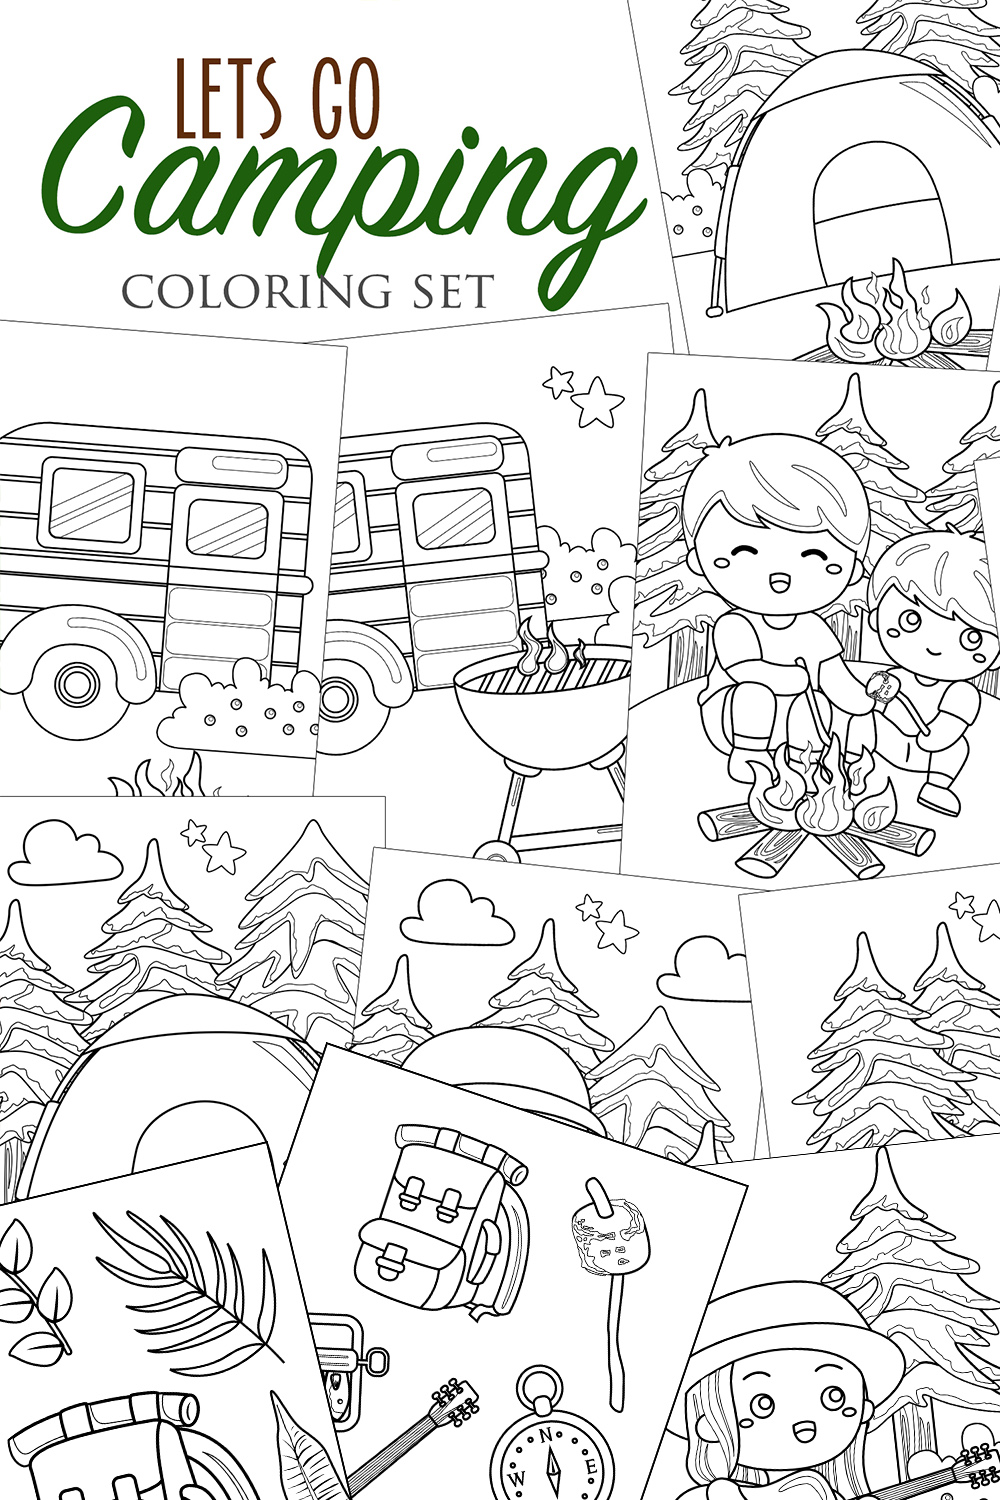 Fun Holiday Lets Go Camping Outdoor Activity Coloring Pages for Kids and Adult pinterest preview image.